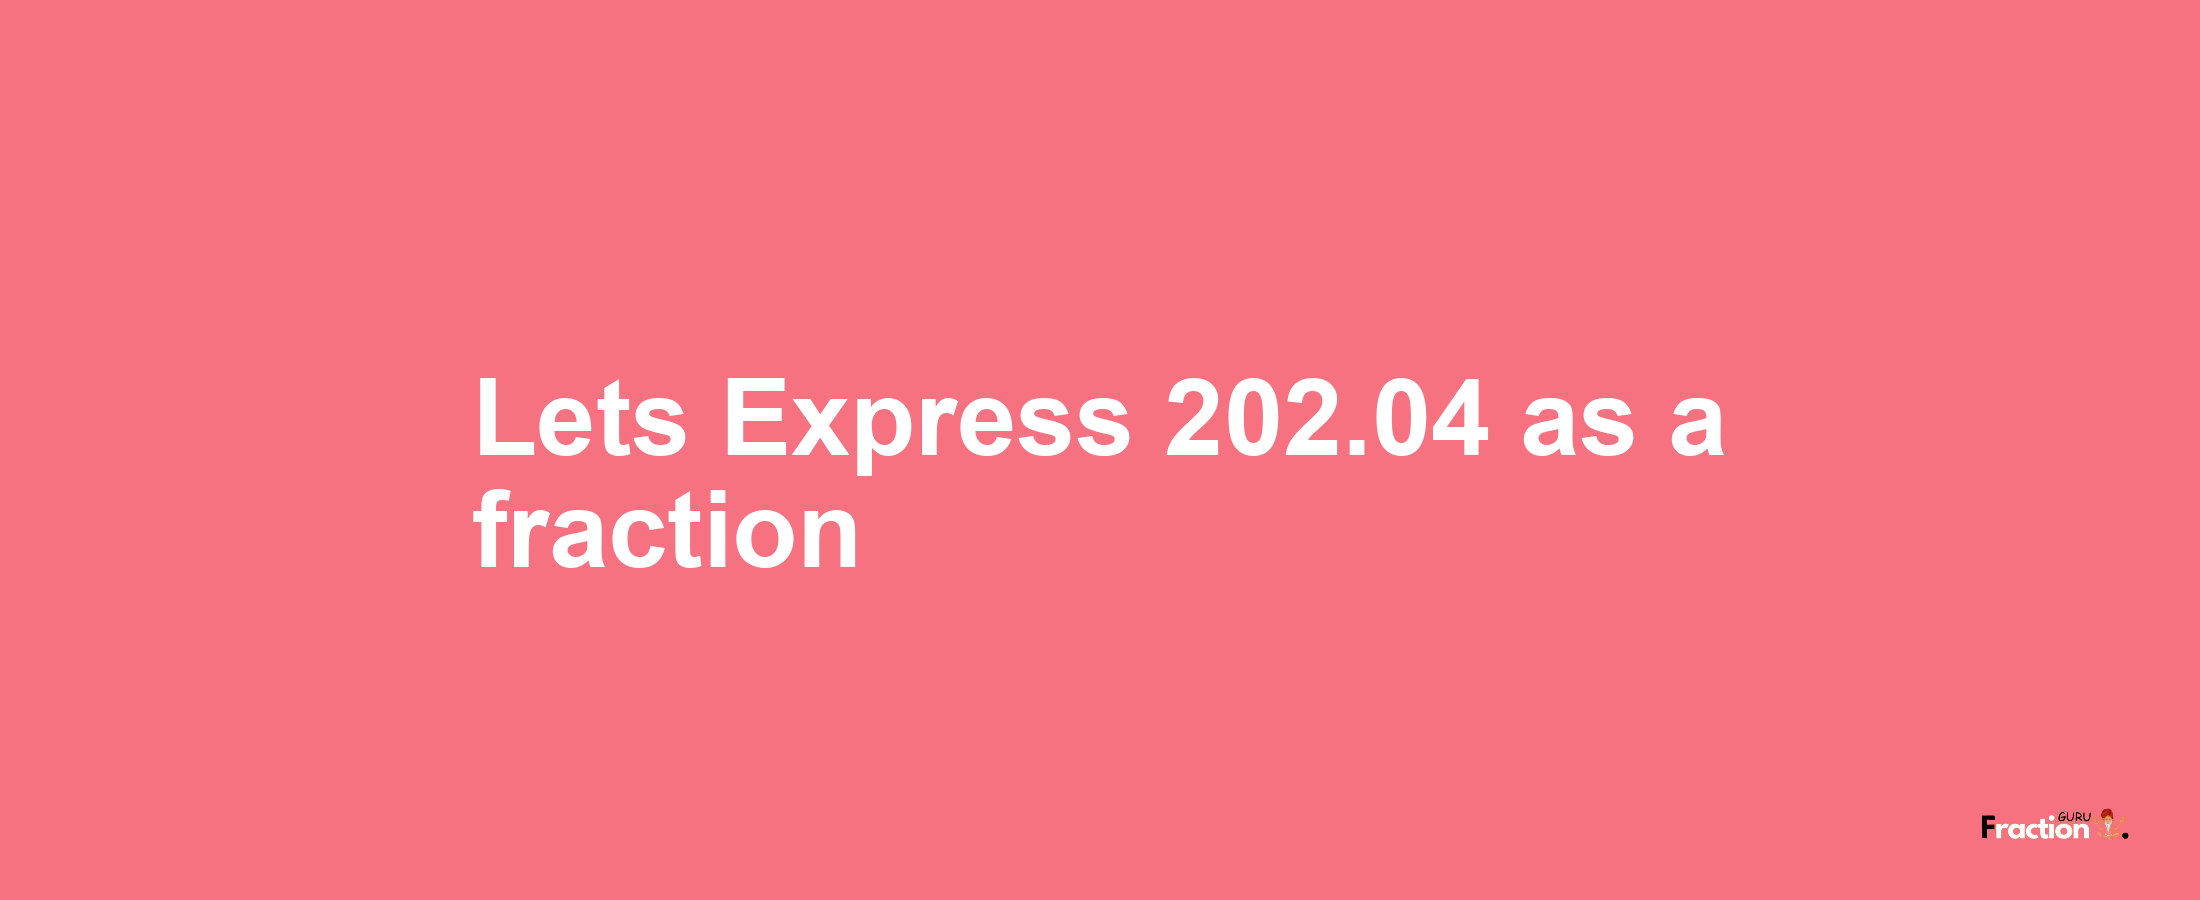 Lets Express 202.04 as afraction